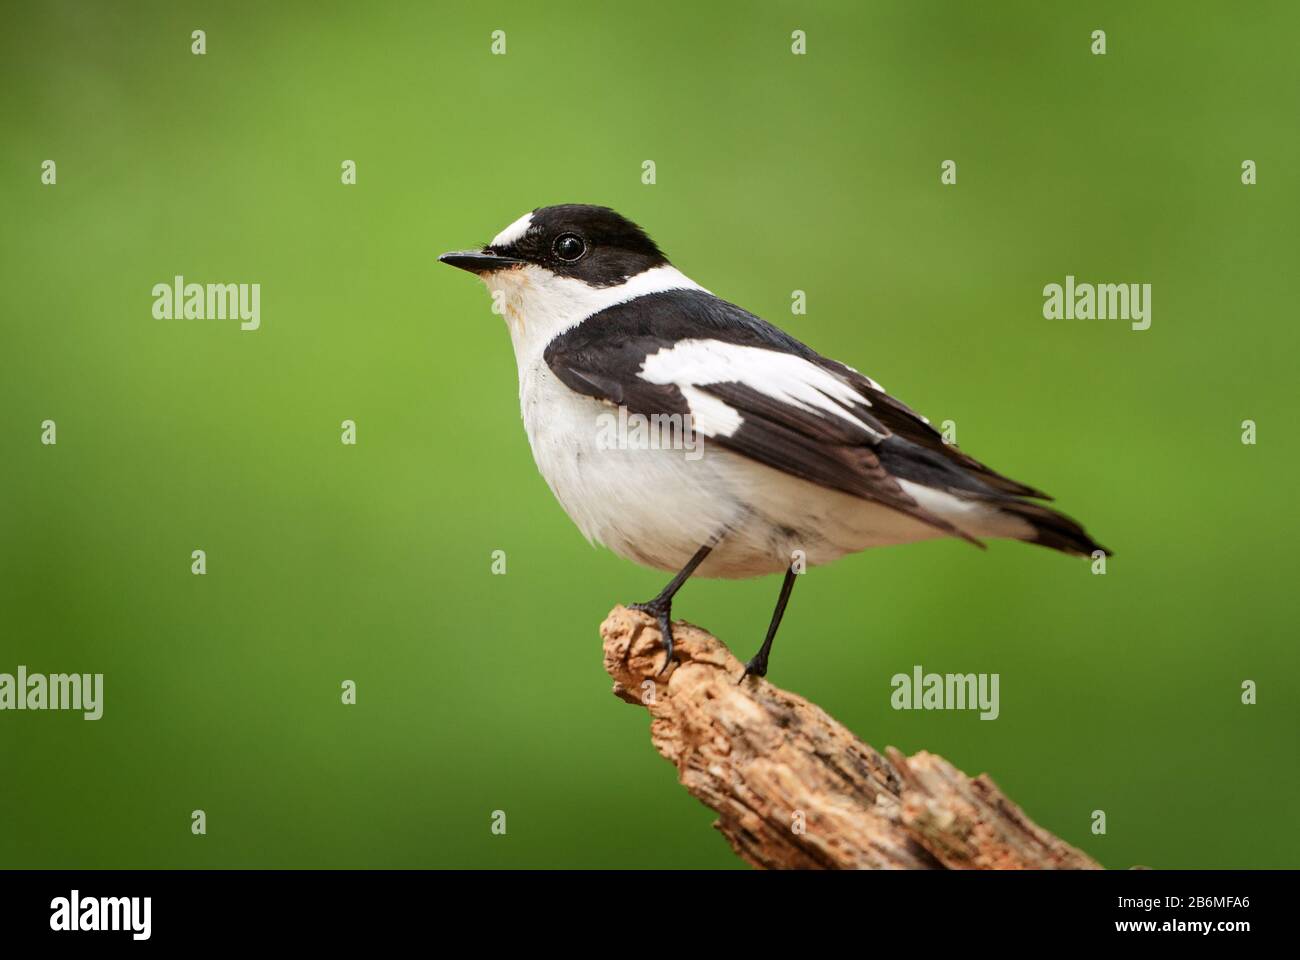 Collared Flycatcher - Ficedula albicollis, beautiful black and white perching bird from European forests, Hortobagy, Hungary. Stock Photo